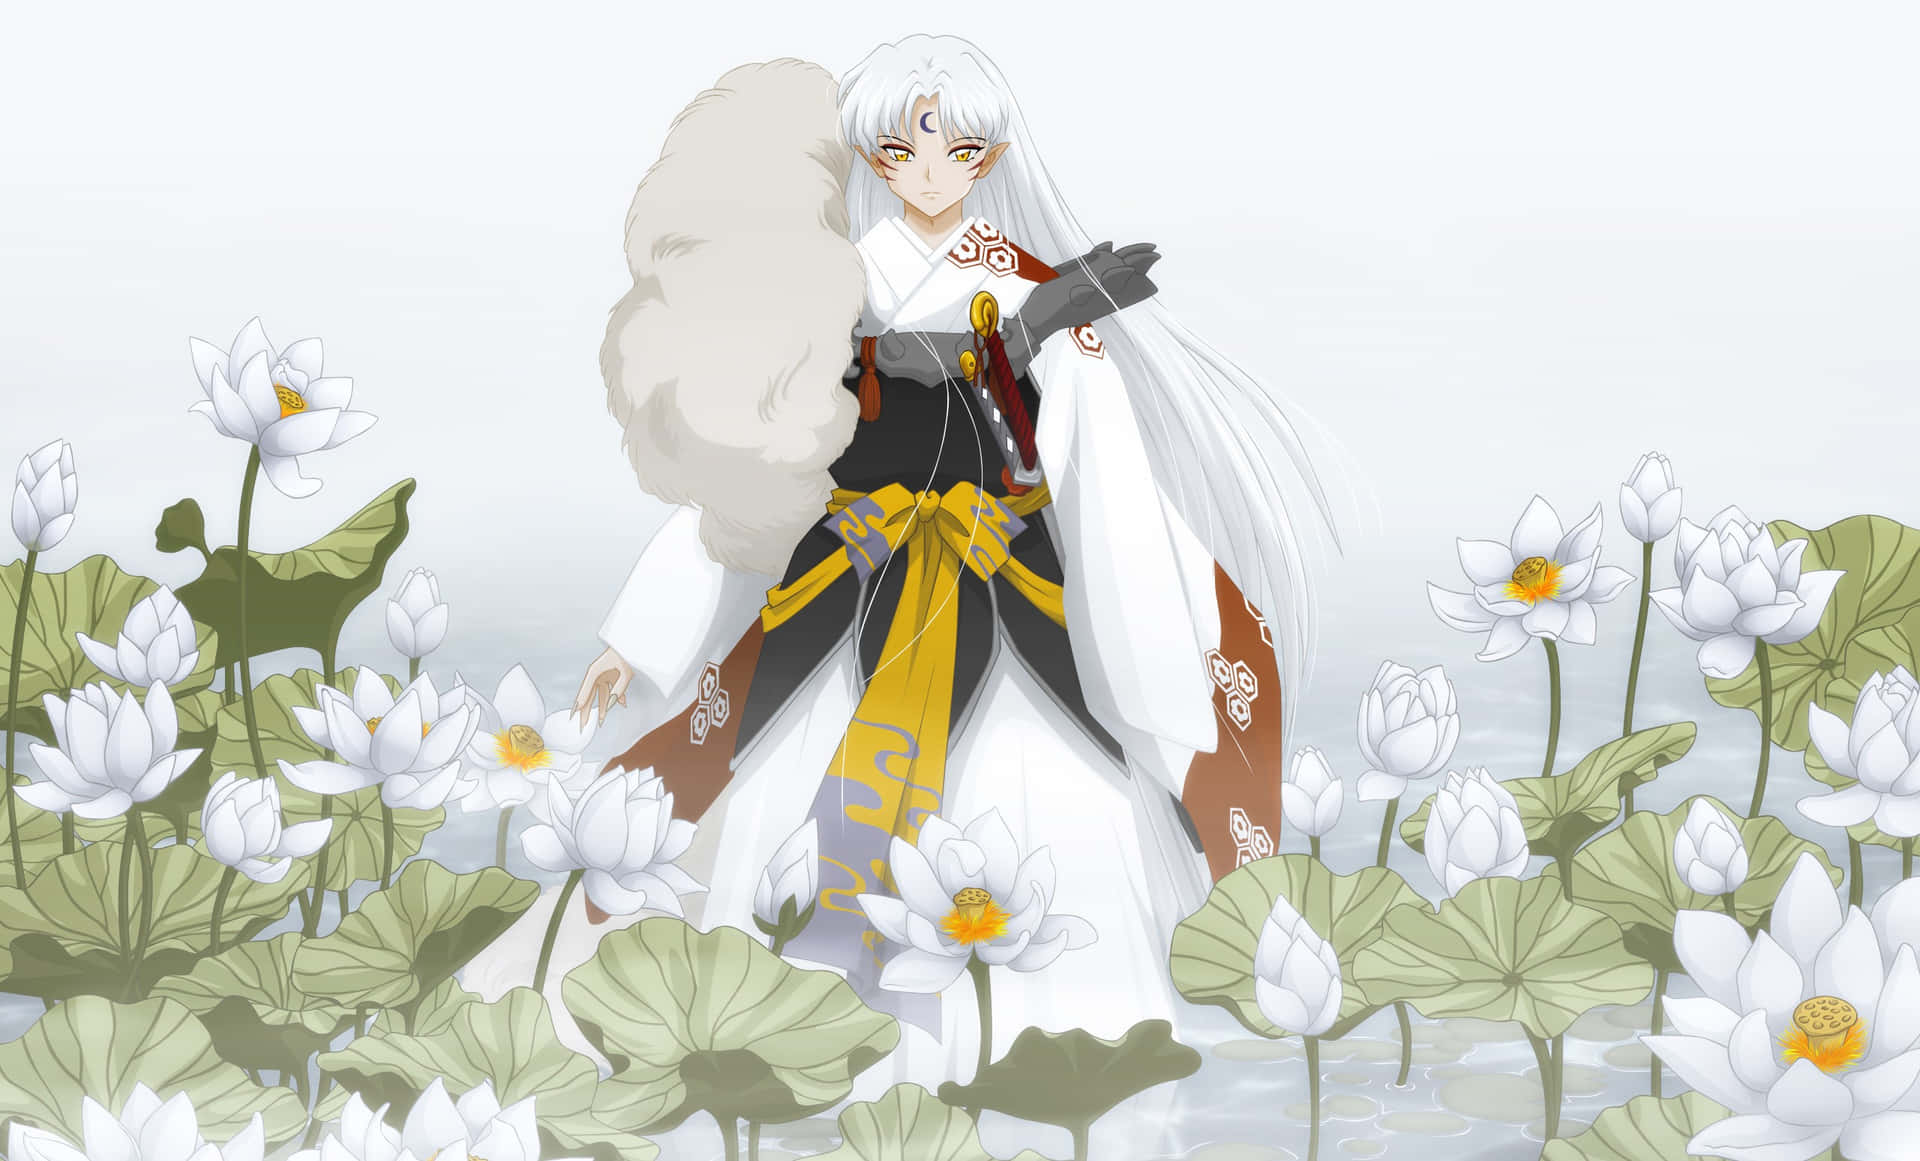 Sesshomaru, The Fearsome Demon Lord From The Series Inuyasha